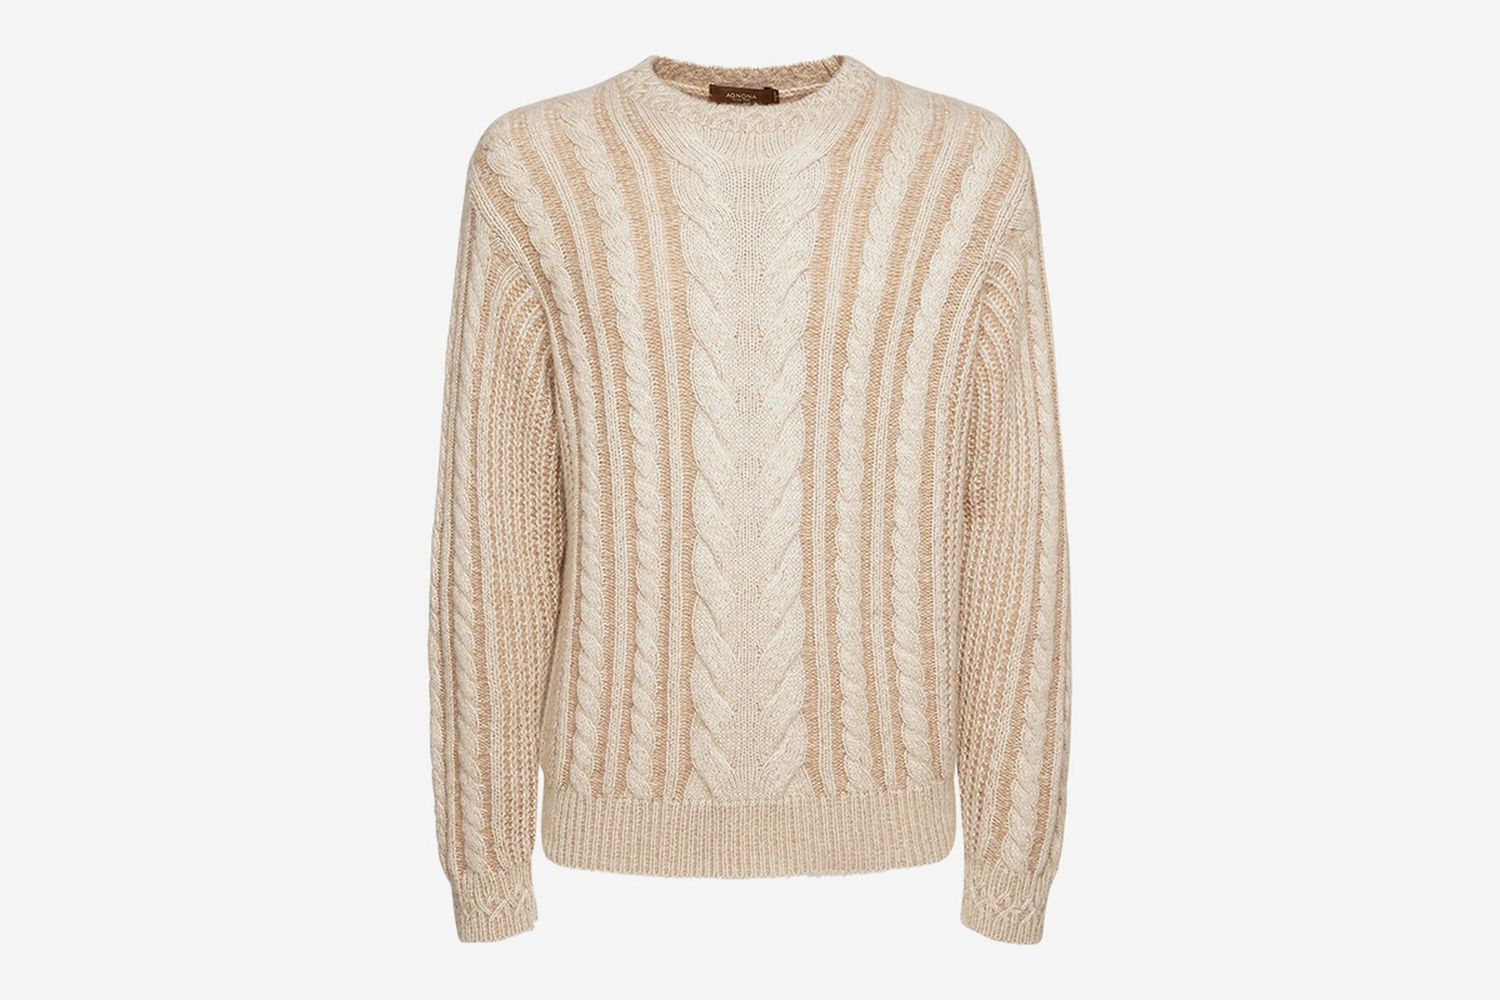 10 of the Best Wool Sweaters to Wear to the Office in 2021